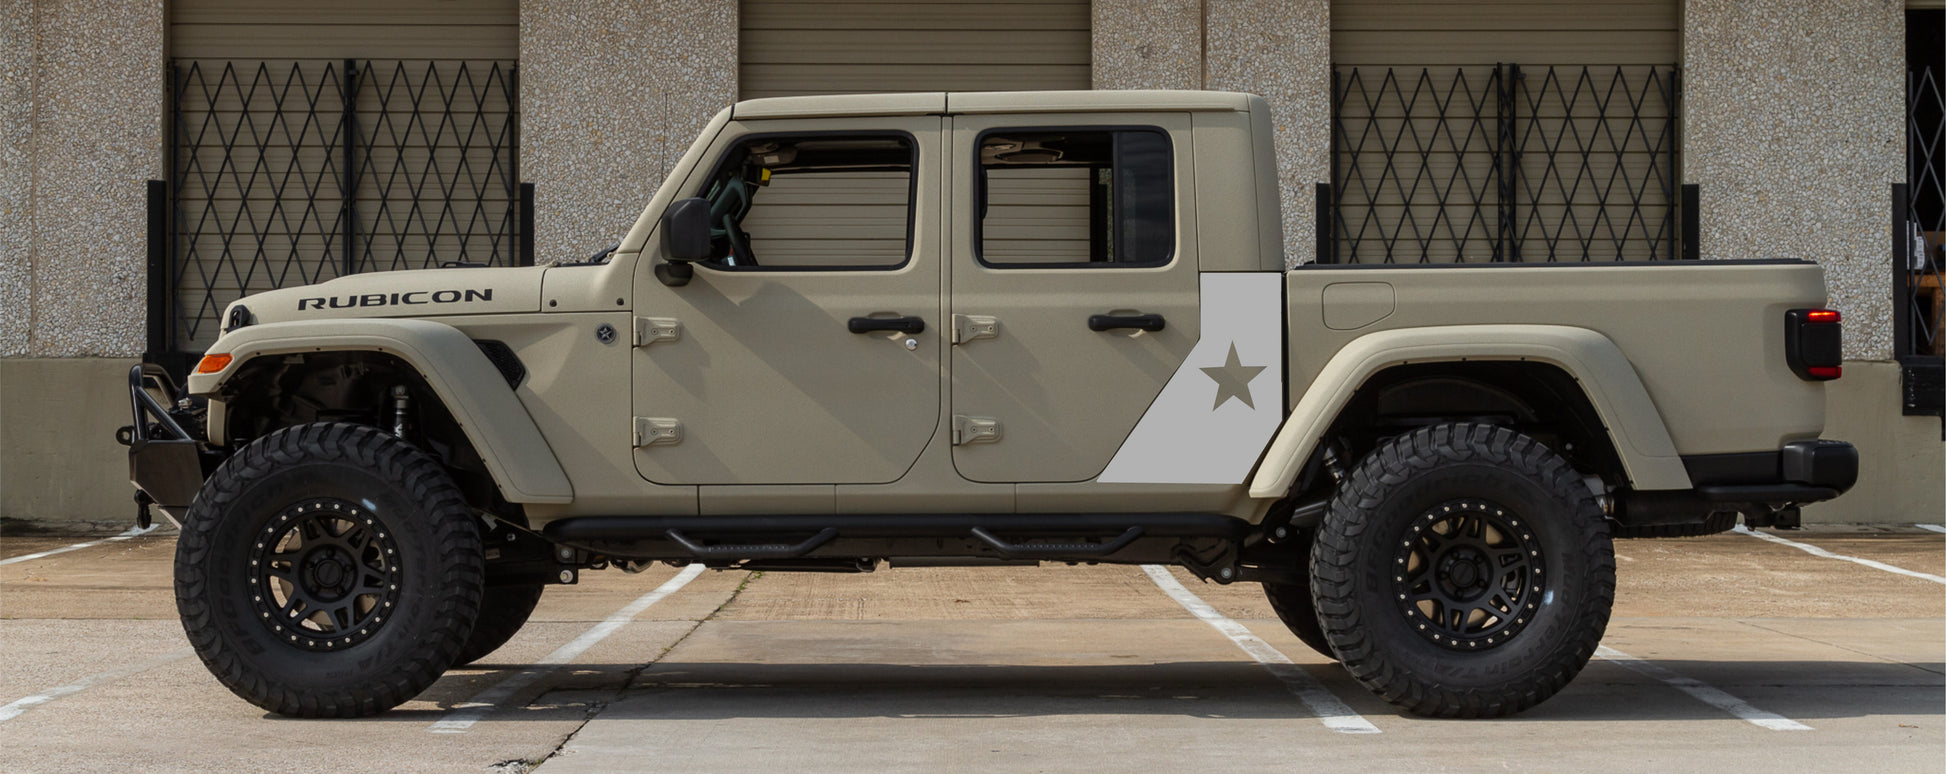 Military Star Decal Stickers For Jeep Gladiator